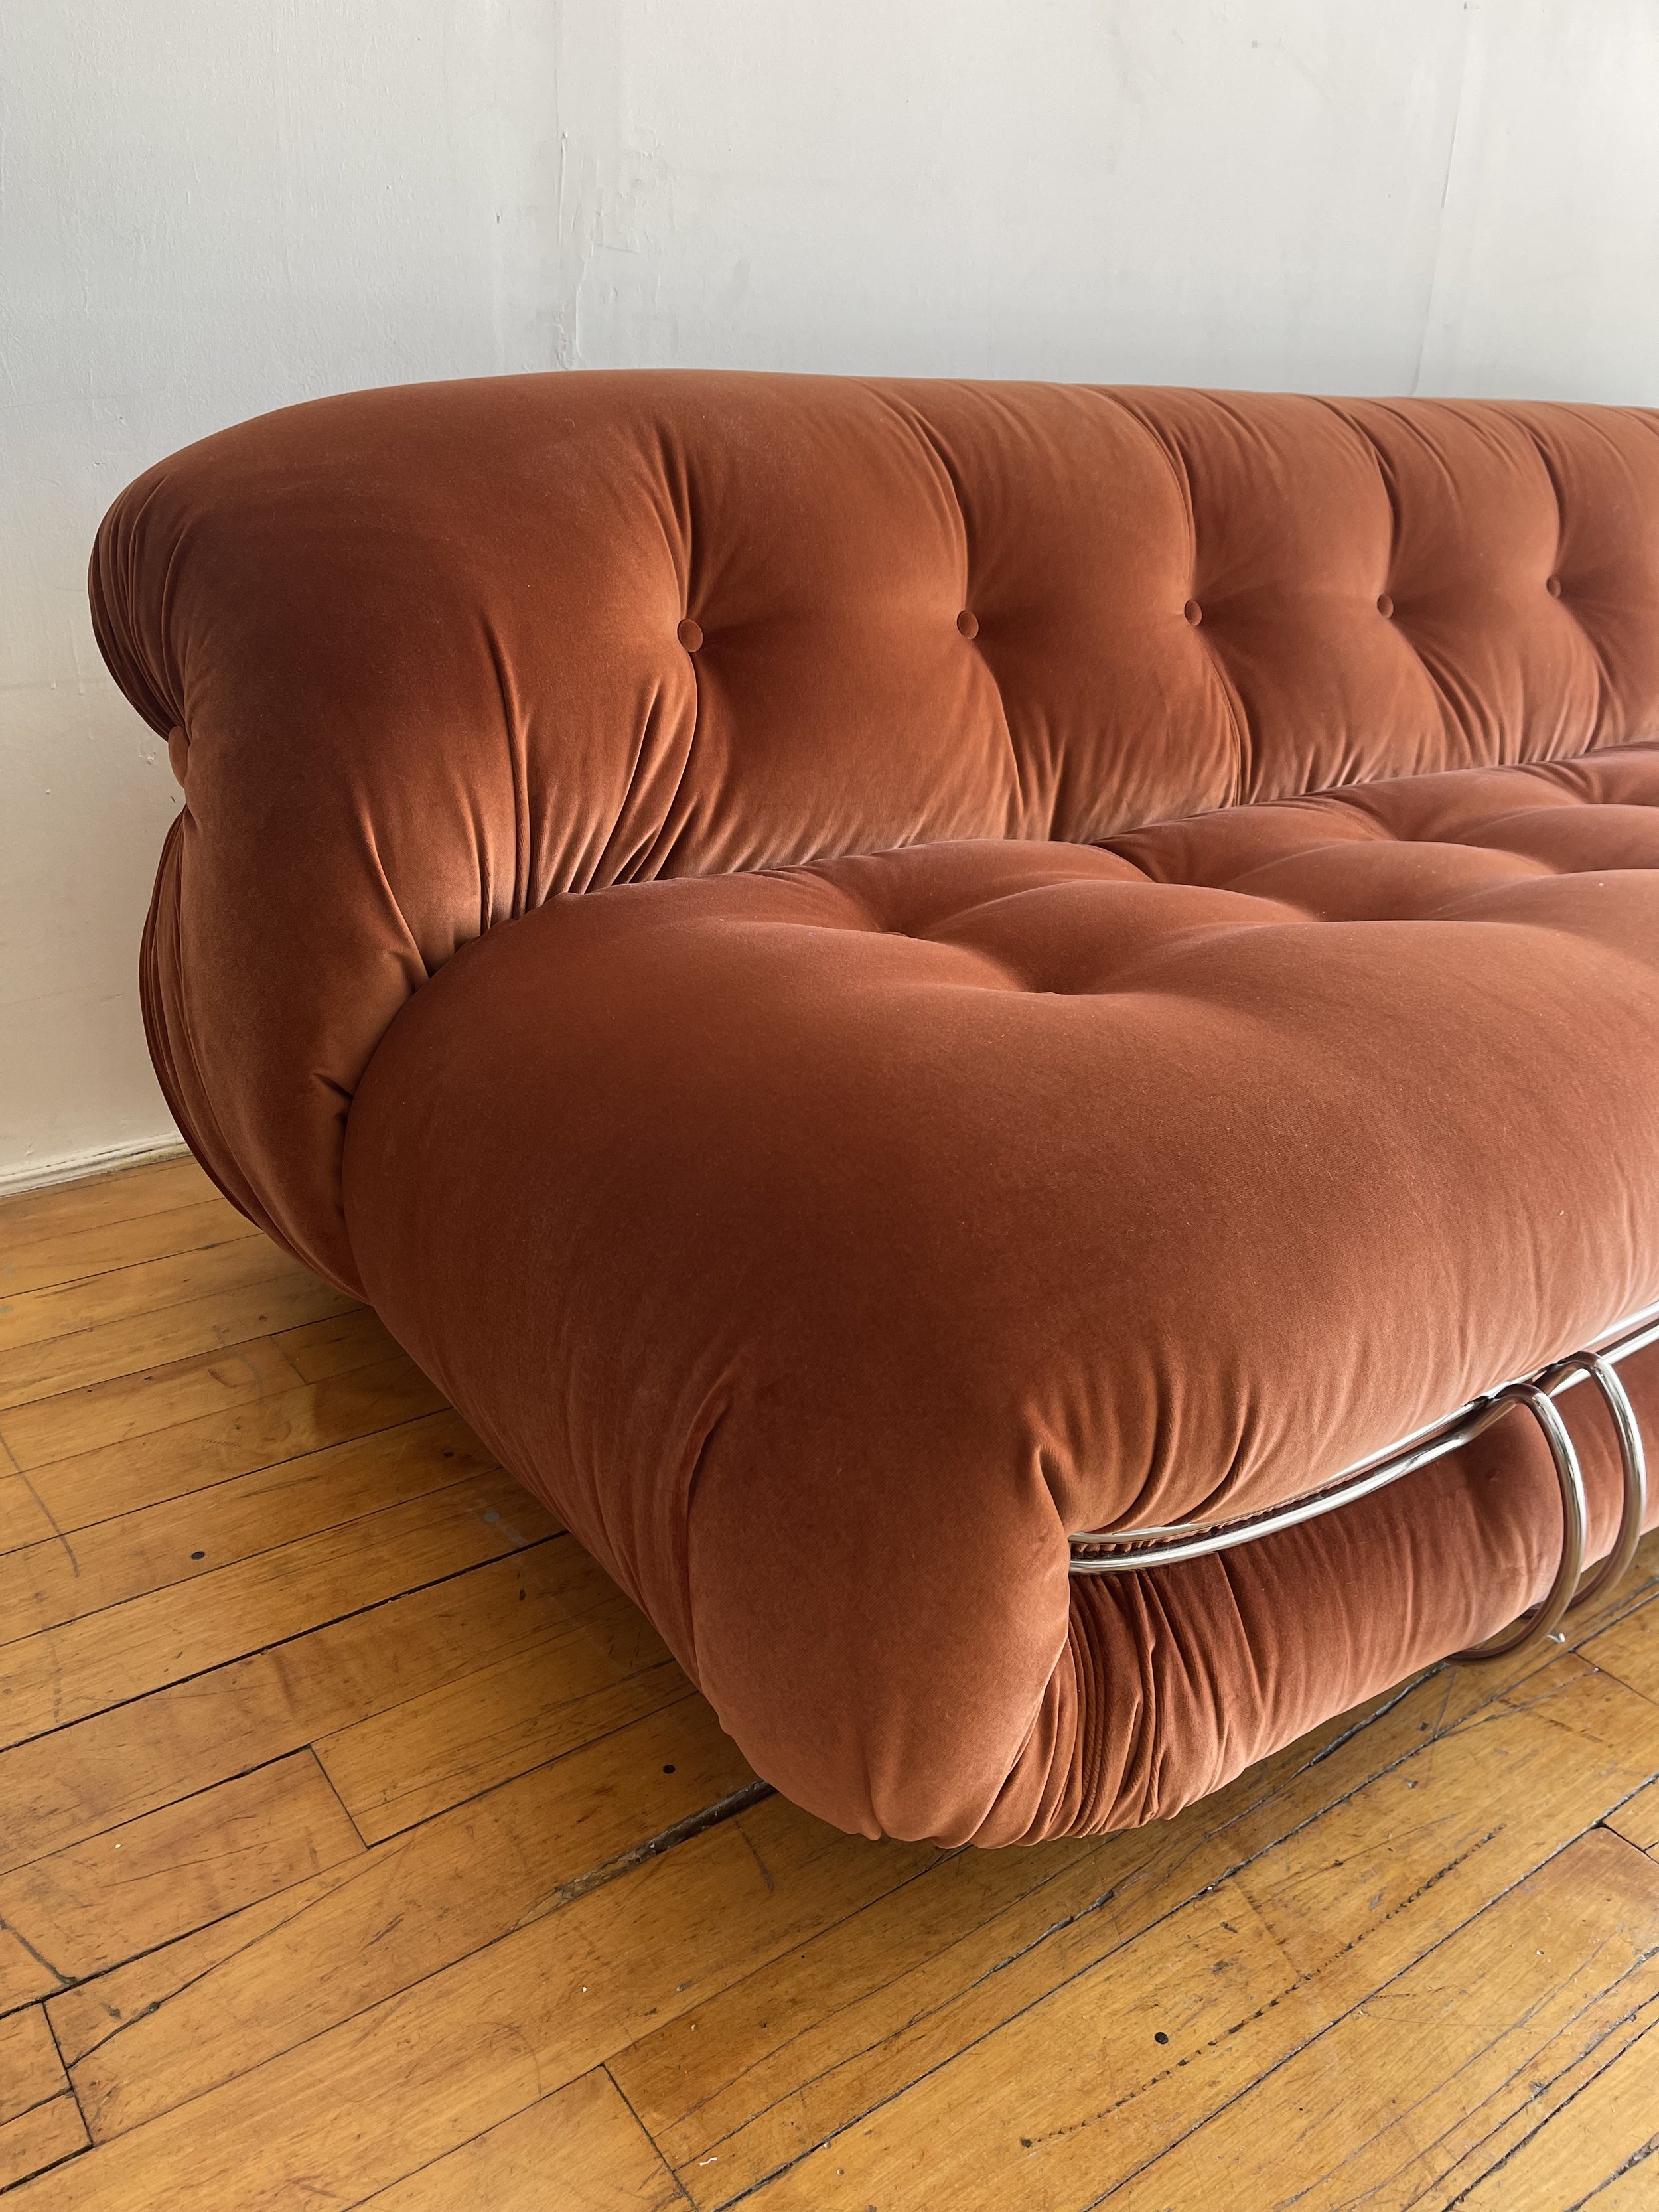 Vintage Soriana Sofa design Tobia Scarpa for Cassina 1970s | view of the tufted fabric 